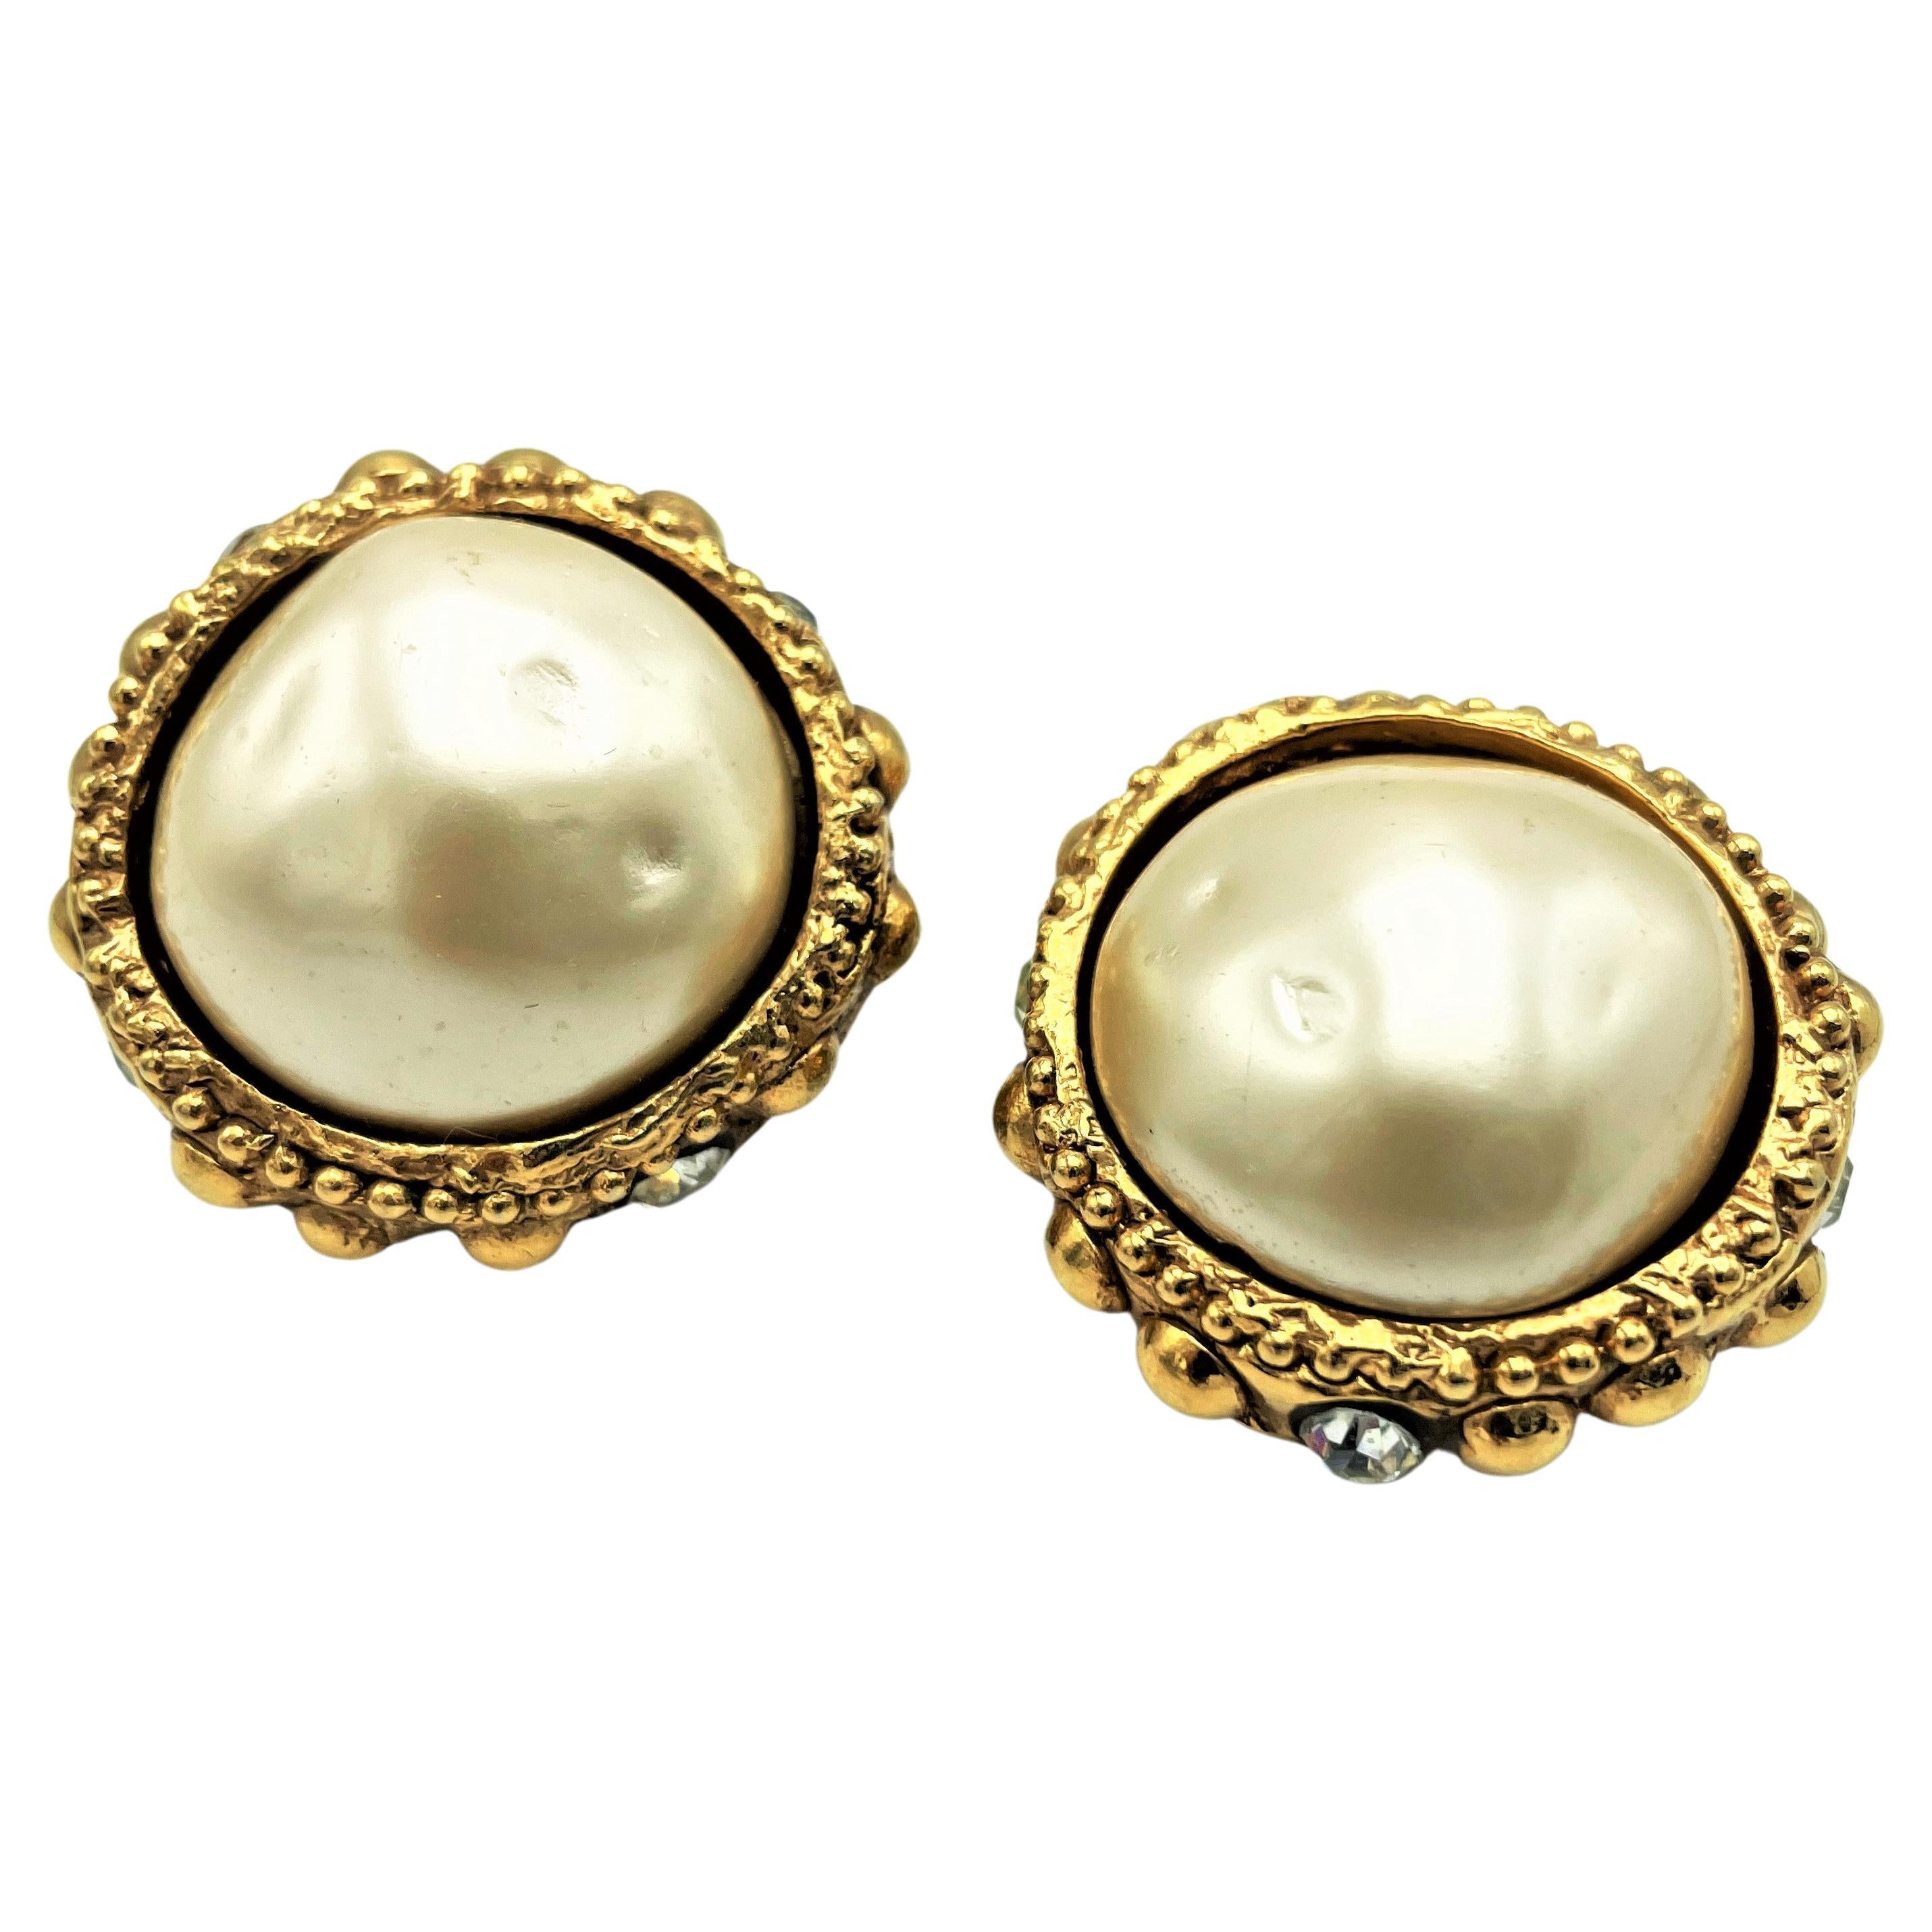 About
Vintage ALEXIS LAHELLEC Paris, with big false pearl, rhinestones, gold plated Resin.
Measurement:
Diameter .1.34 inches ( 3,4 cm)
Deep: 0,60 inches (1,5 cm)
Features:
-Fake pearl 0,98 inches ( 2,5 cm)
-Clip back earring
-Signed Alexis Lehallec